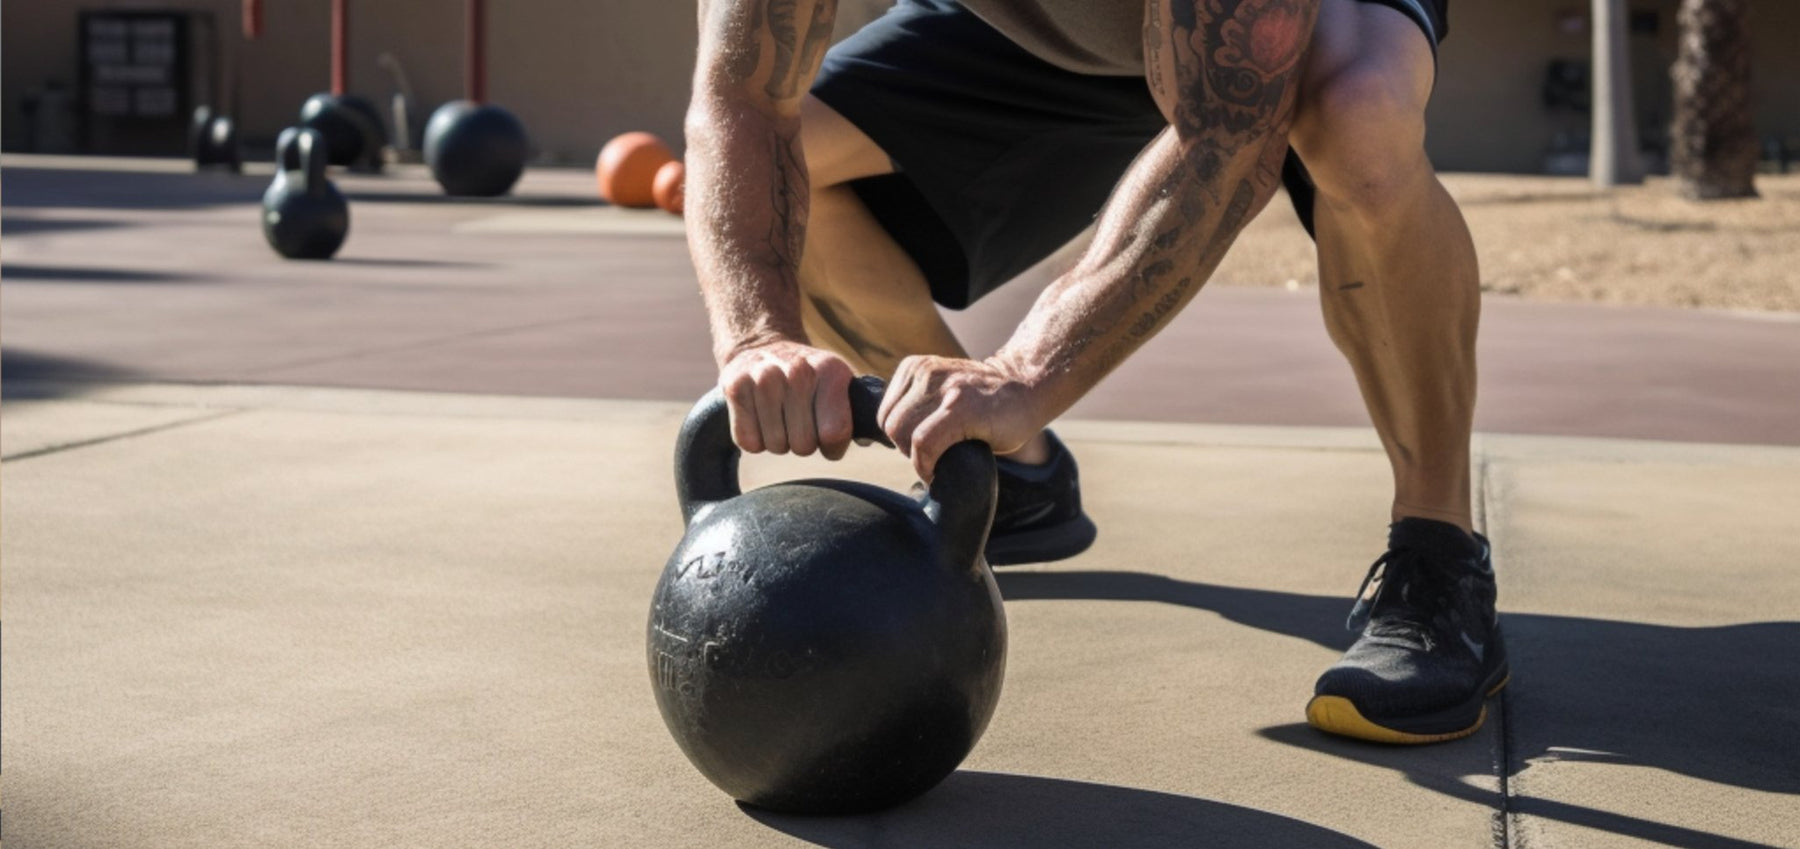 Master the Kettlebell Swing: A Must-Have Skill for New Fitness Trainers - Agatsu Fitness